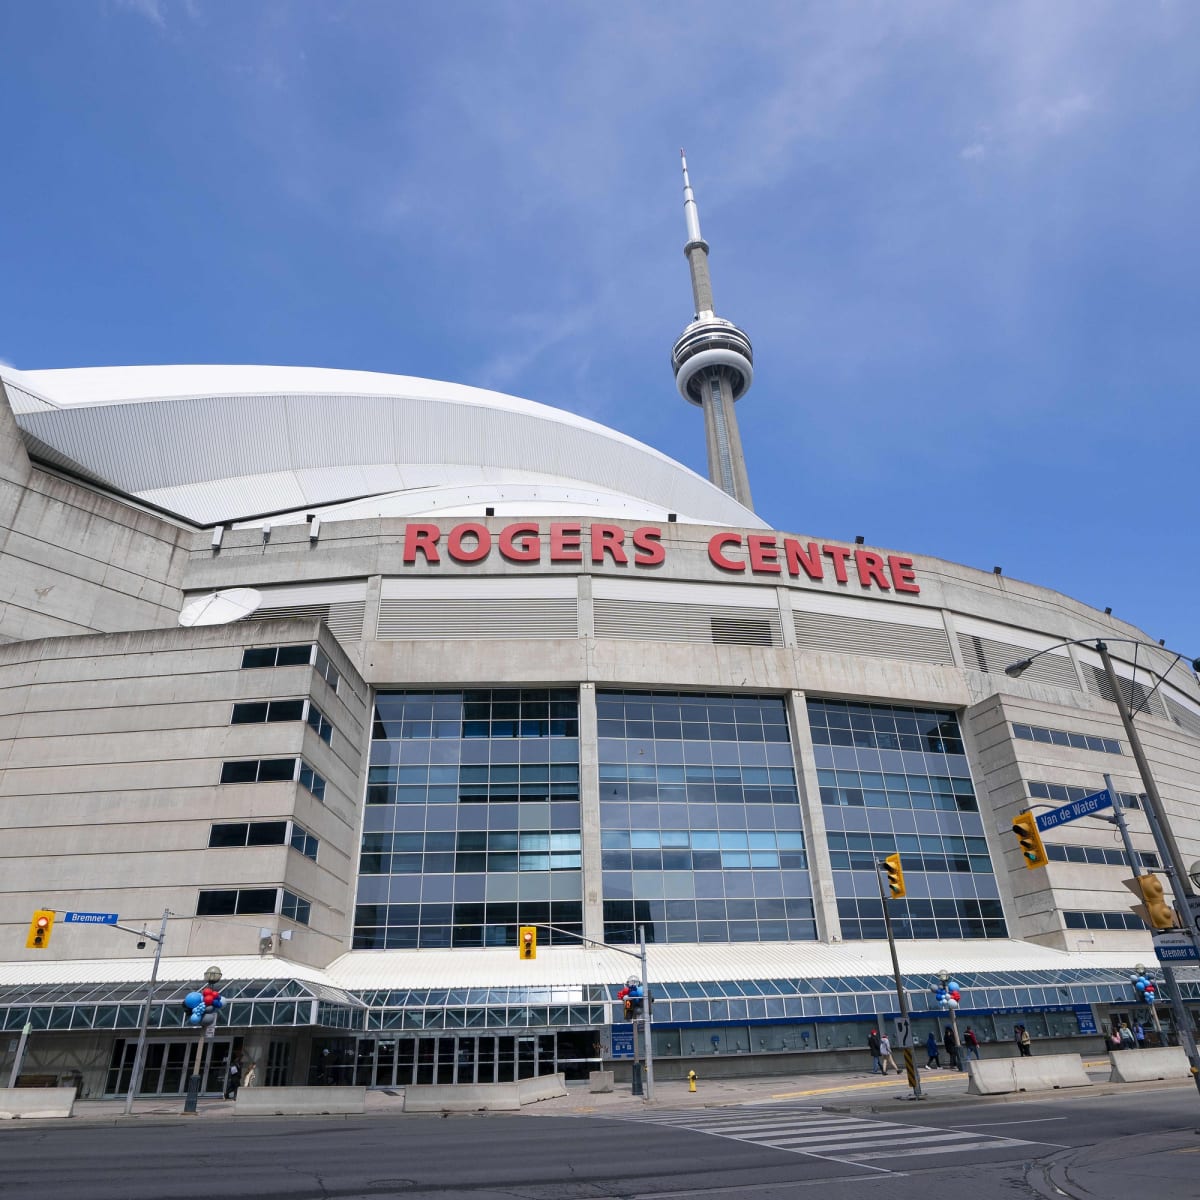 No new Toronto ballpark as Blue Jays opt for $250 million Rogers Centre  upgrade